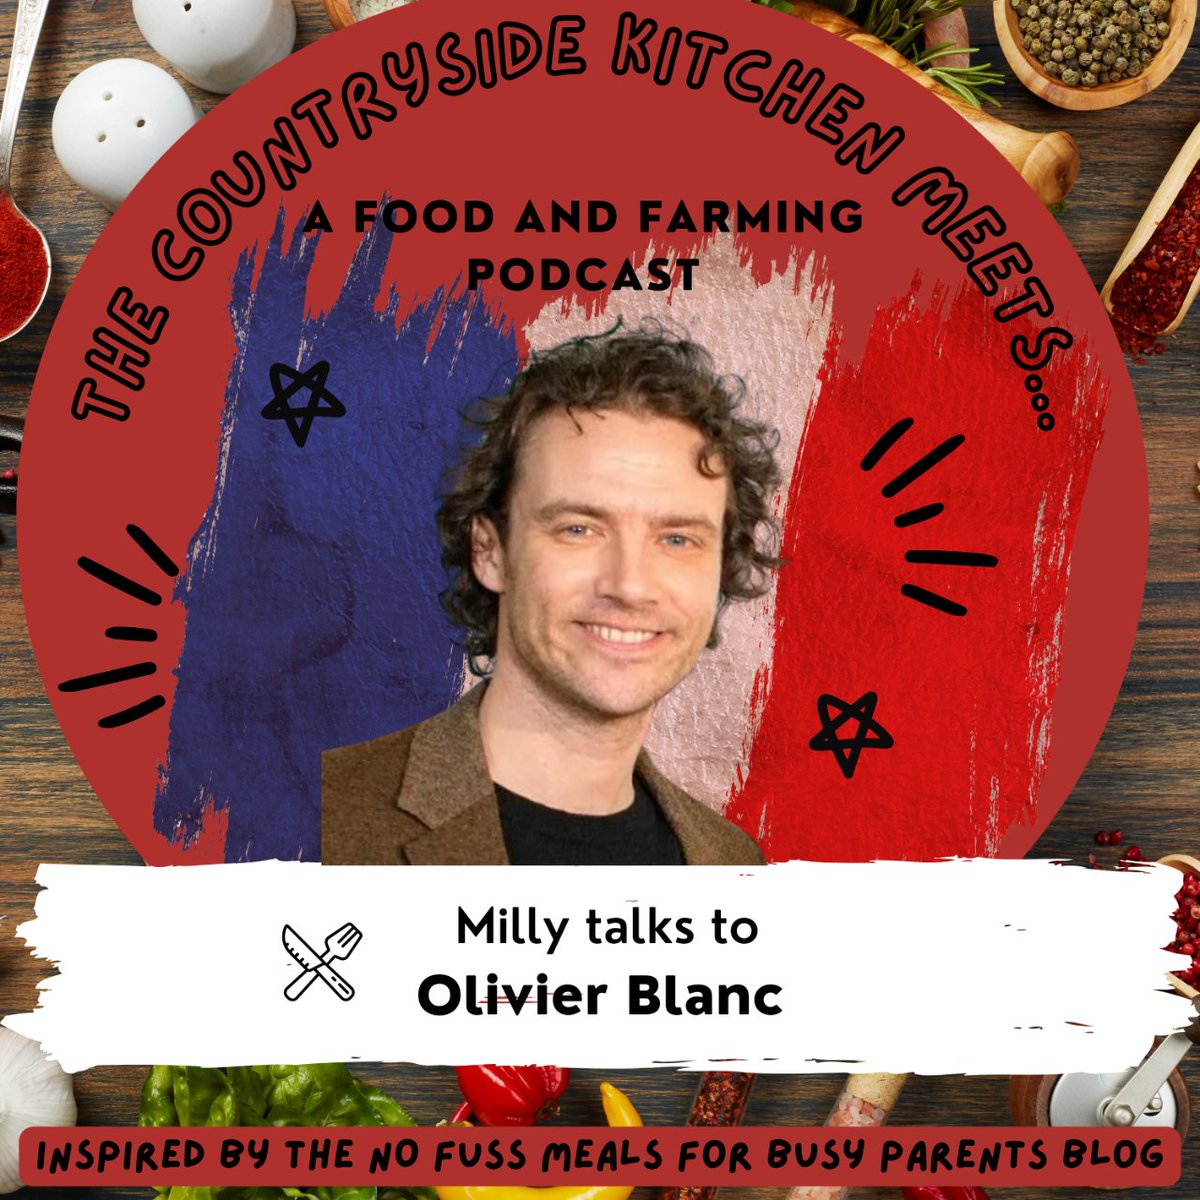 🍴 Ready to revolutionize your kitchen game? Join us on The Countryside Kitchen meets podcast for an epic chat with Olivier Blanc, plus juicy time-saving hacks and British Beef recipes that'll make cooking a breeze! 🥩👩‍🍳 #Foodie #Podcast #BritishBeef #CookingHacks